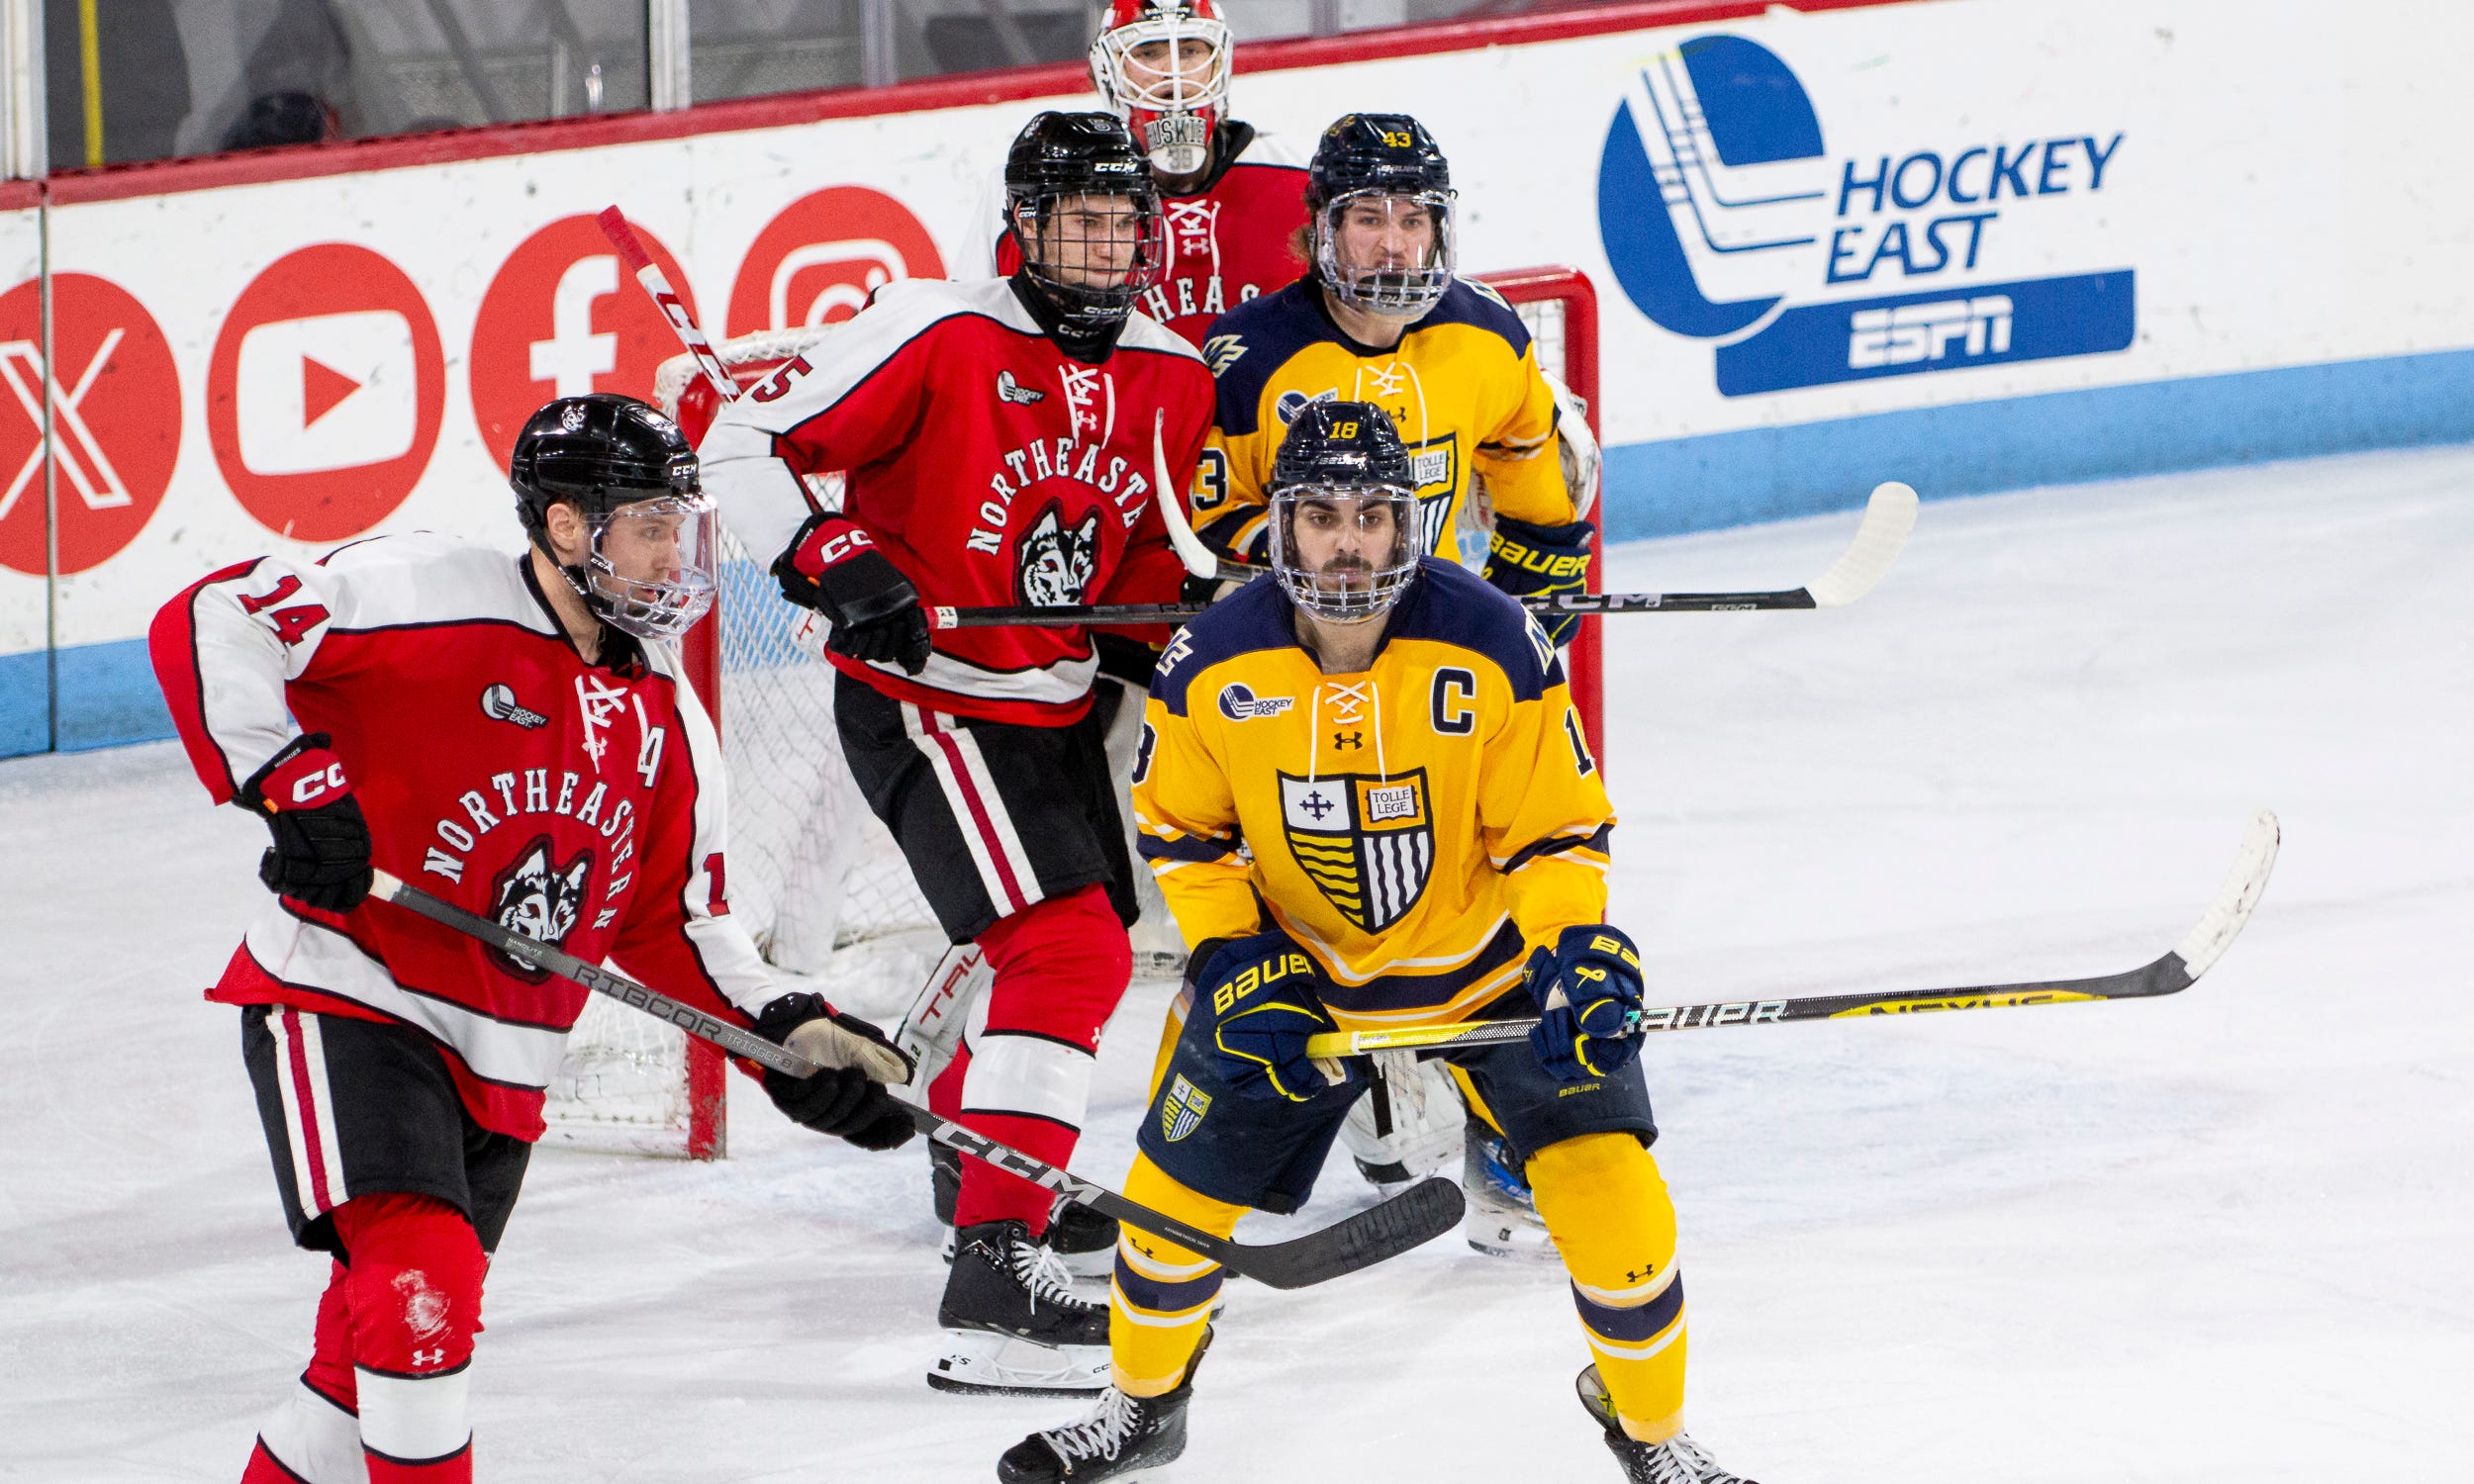 Merrimack's season ends after playoff loss to Northeastern